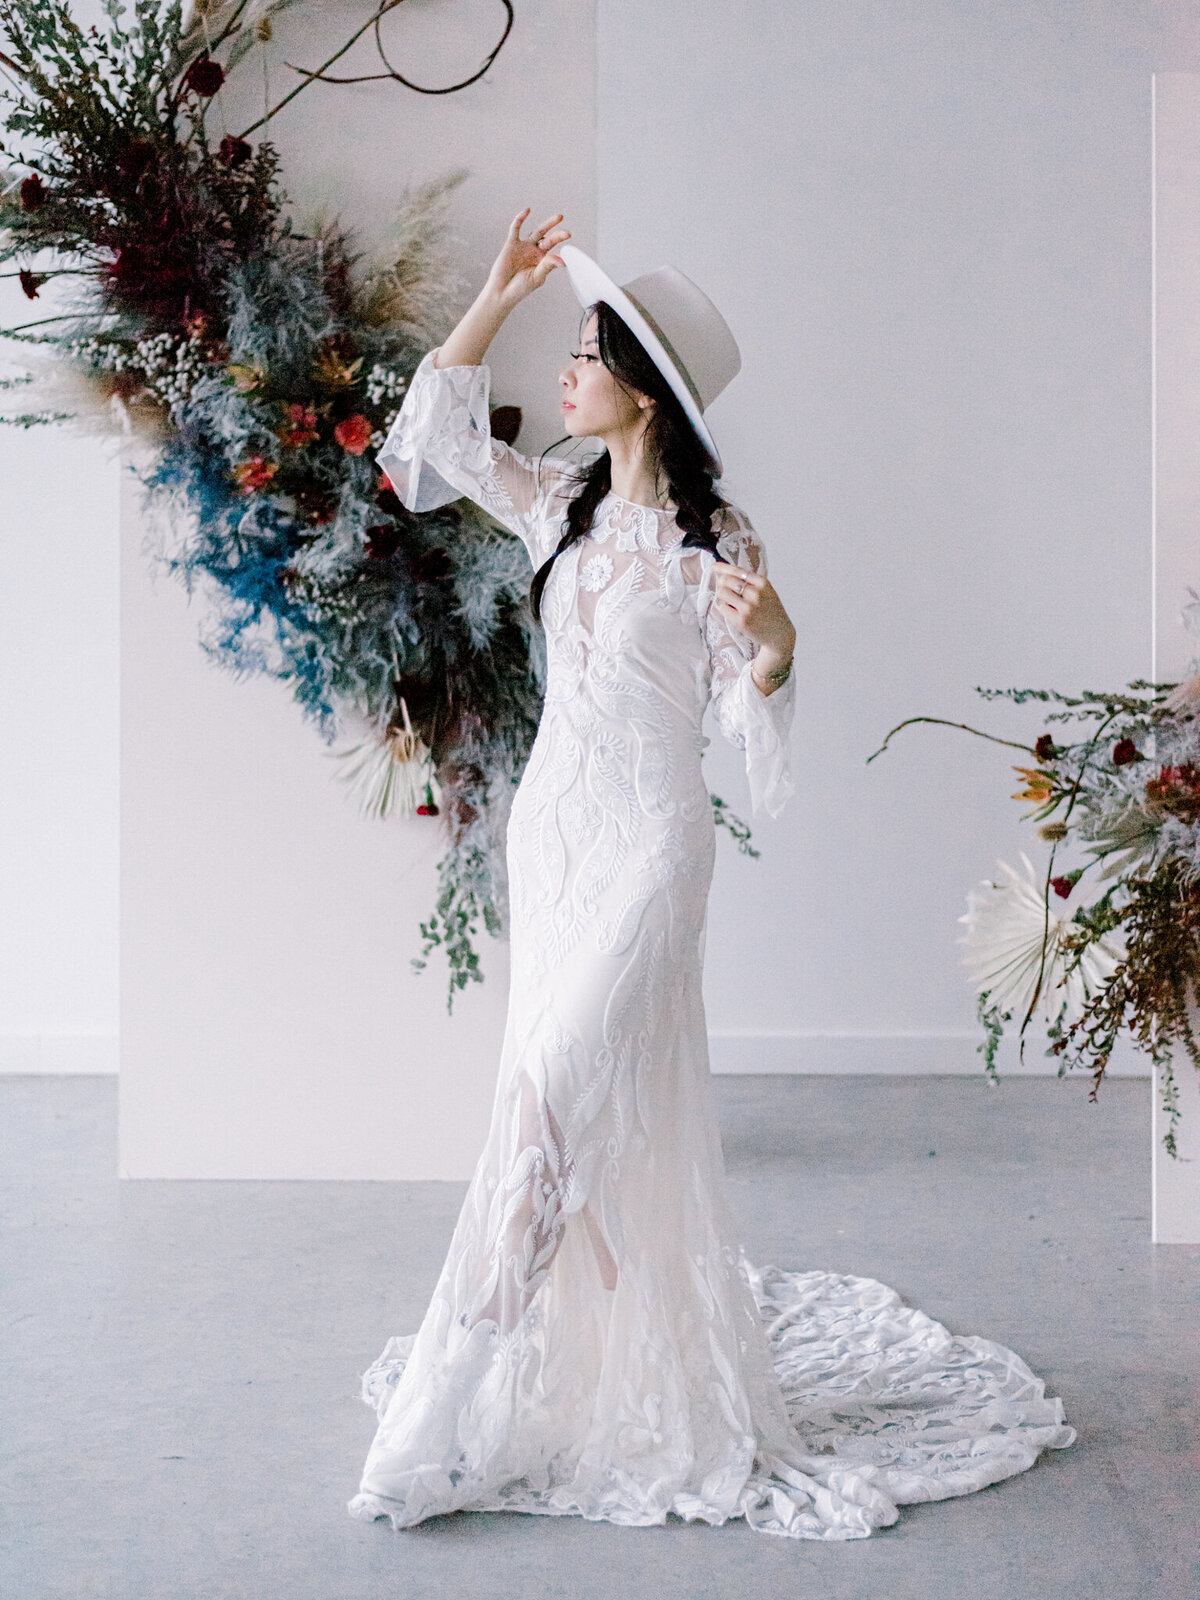 Boho inspired bride wearing bateau wedding dress with lace, long-sleeved with trendy wedding hat, captured by Julie Jagt Photography, fine art wedding photographer in Vancouver, BC. Featured on the Bronte Bride Vendor Guide.